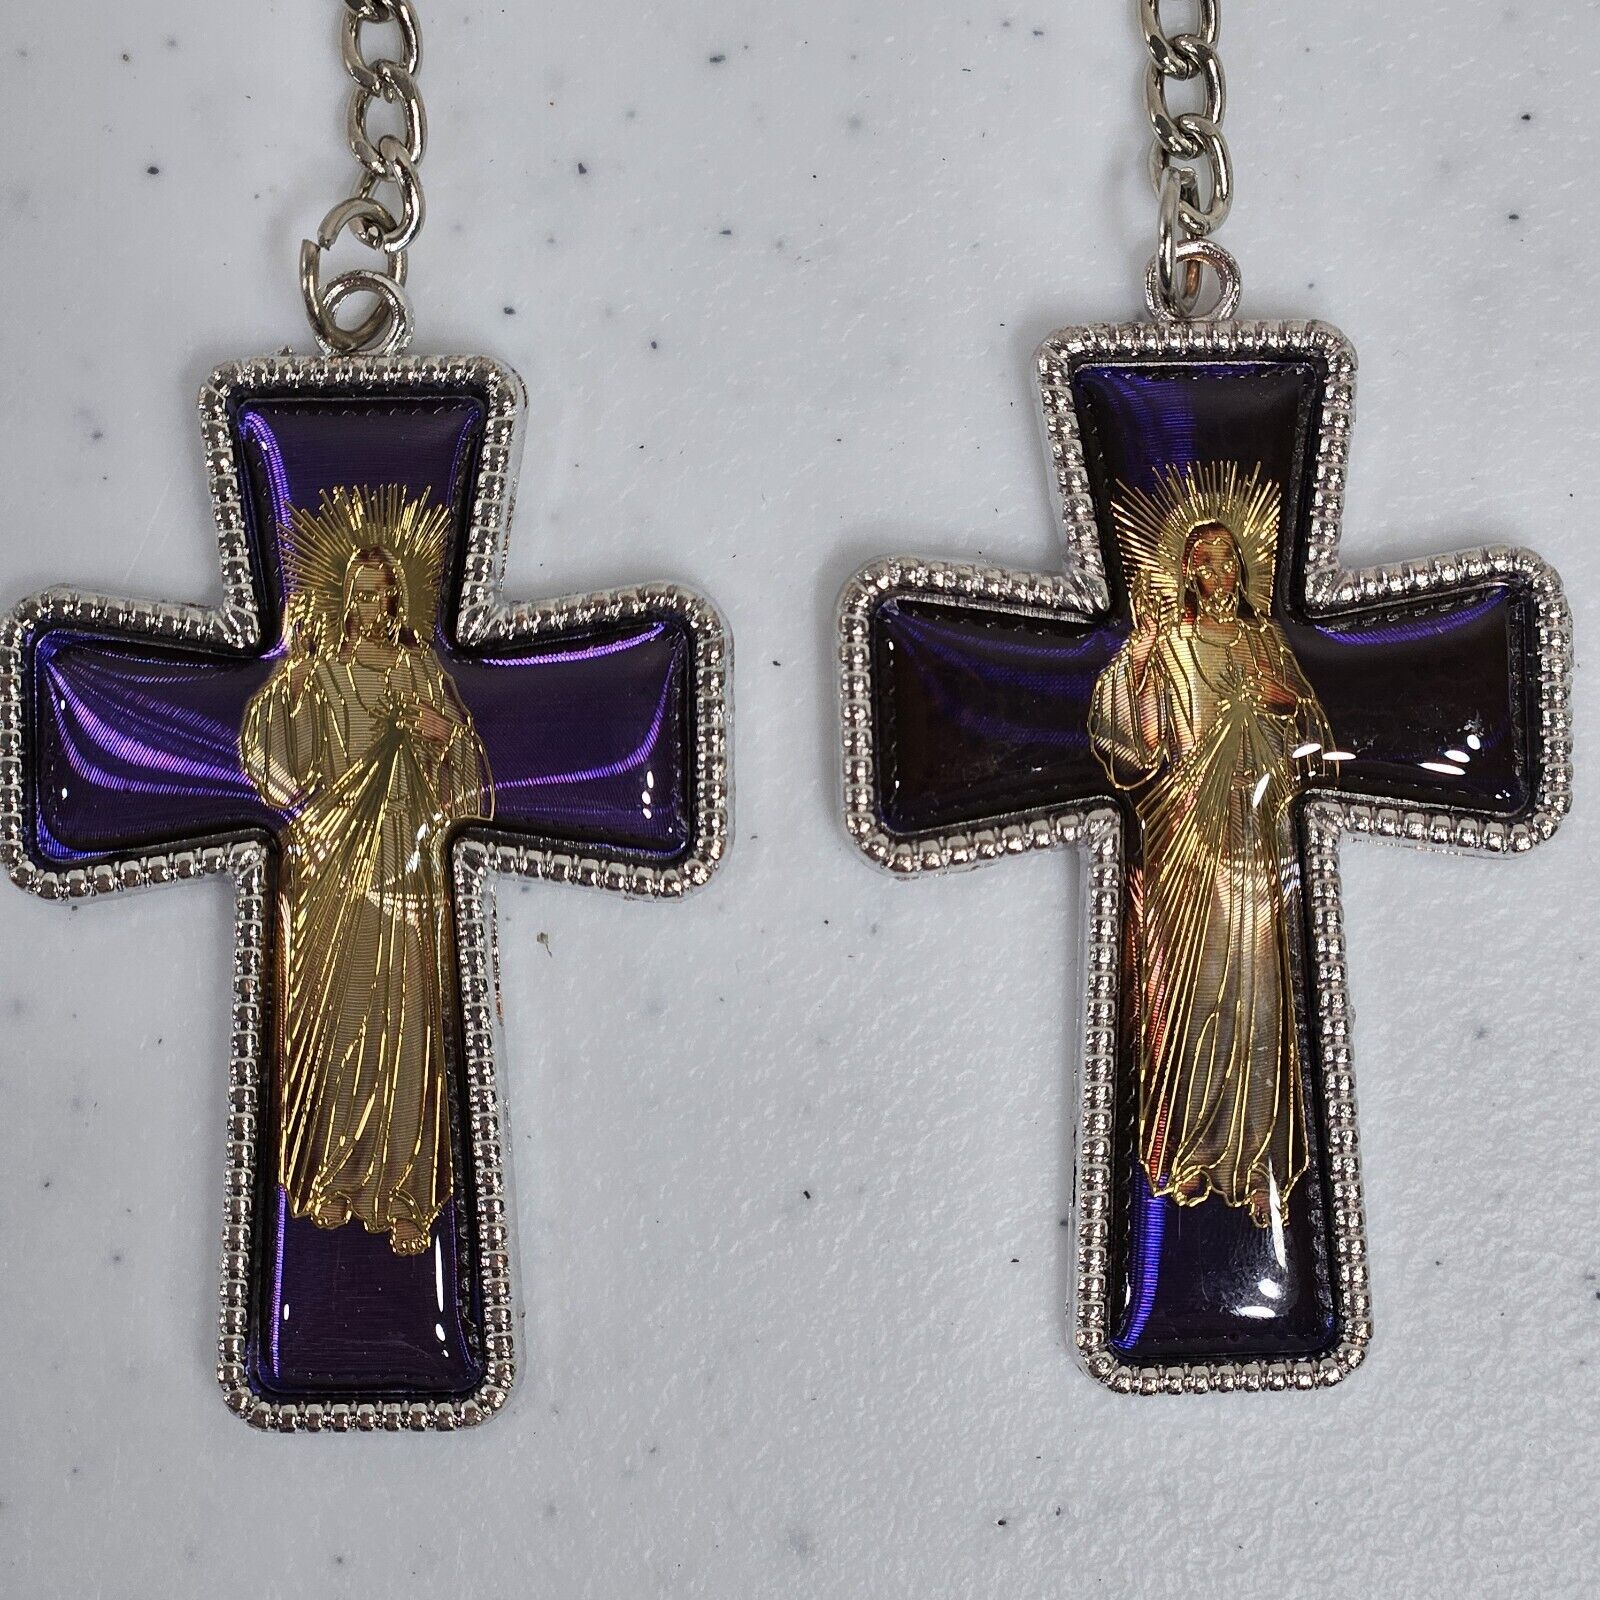 Lot of 2 Cross Keychains Silver Tone Keyhole Religious Pary Favor Gift 5\